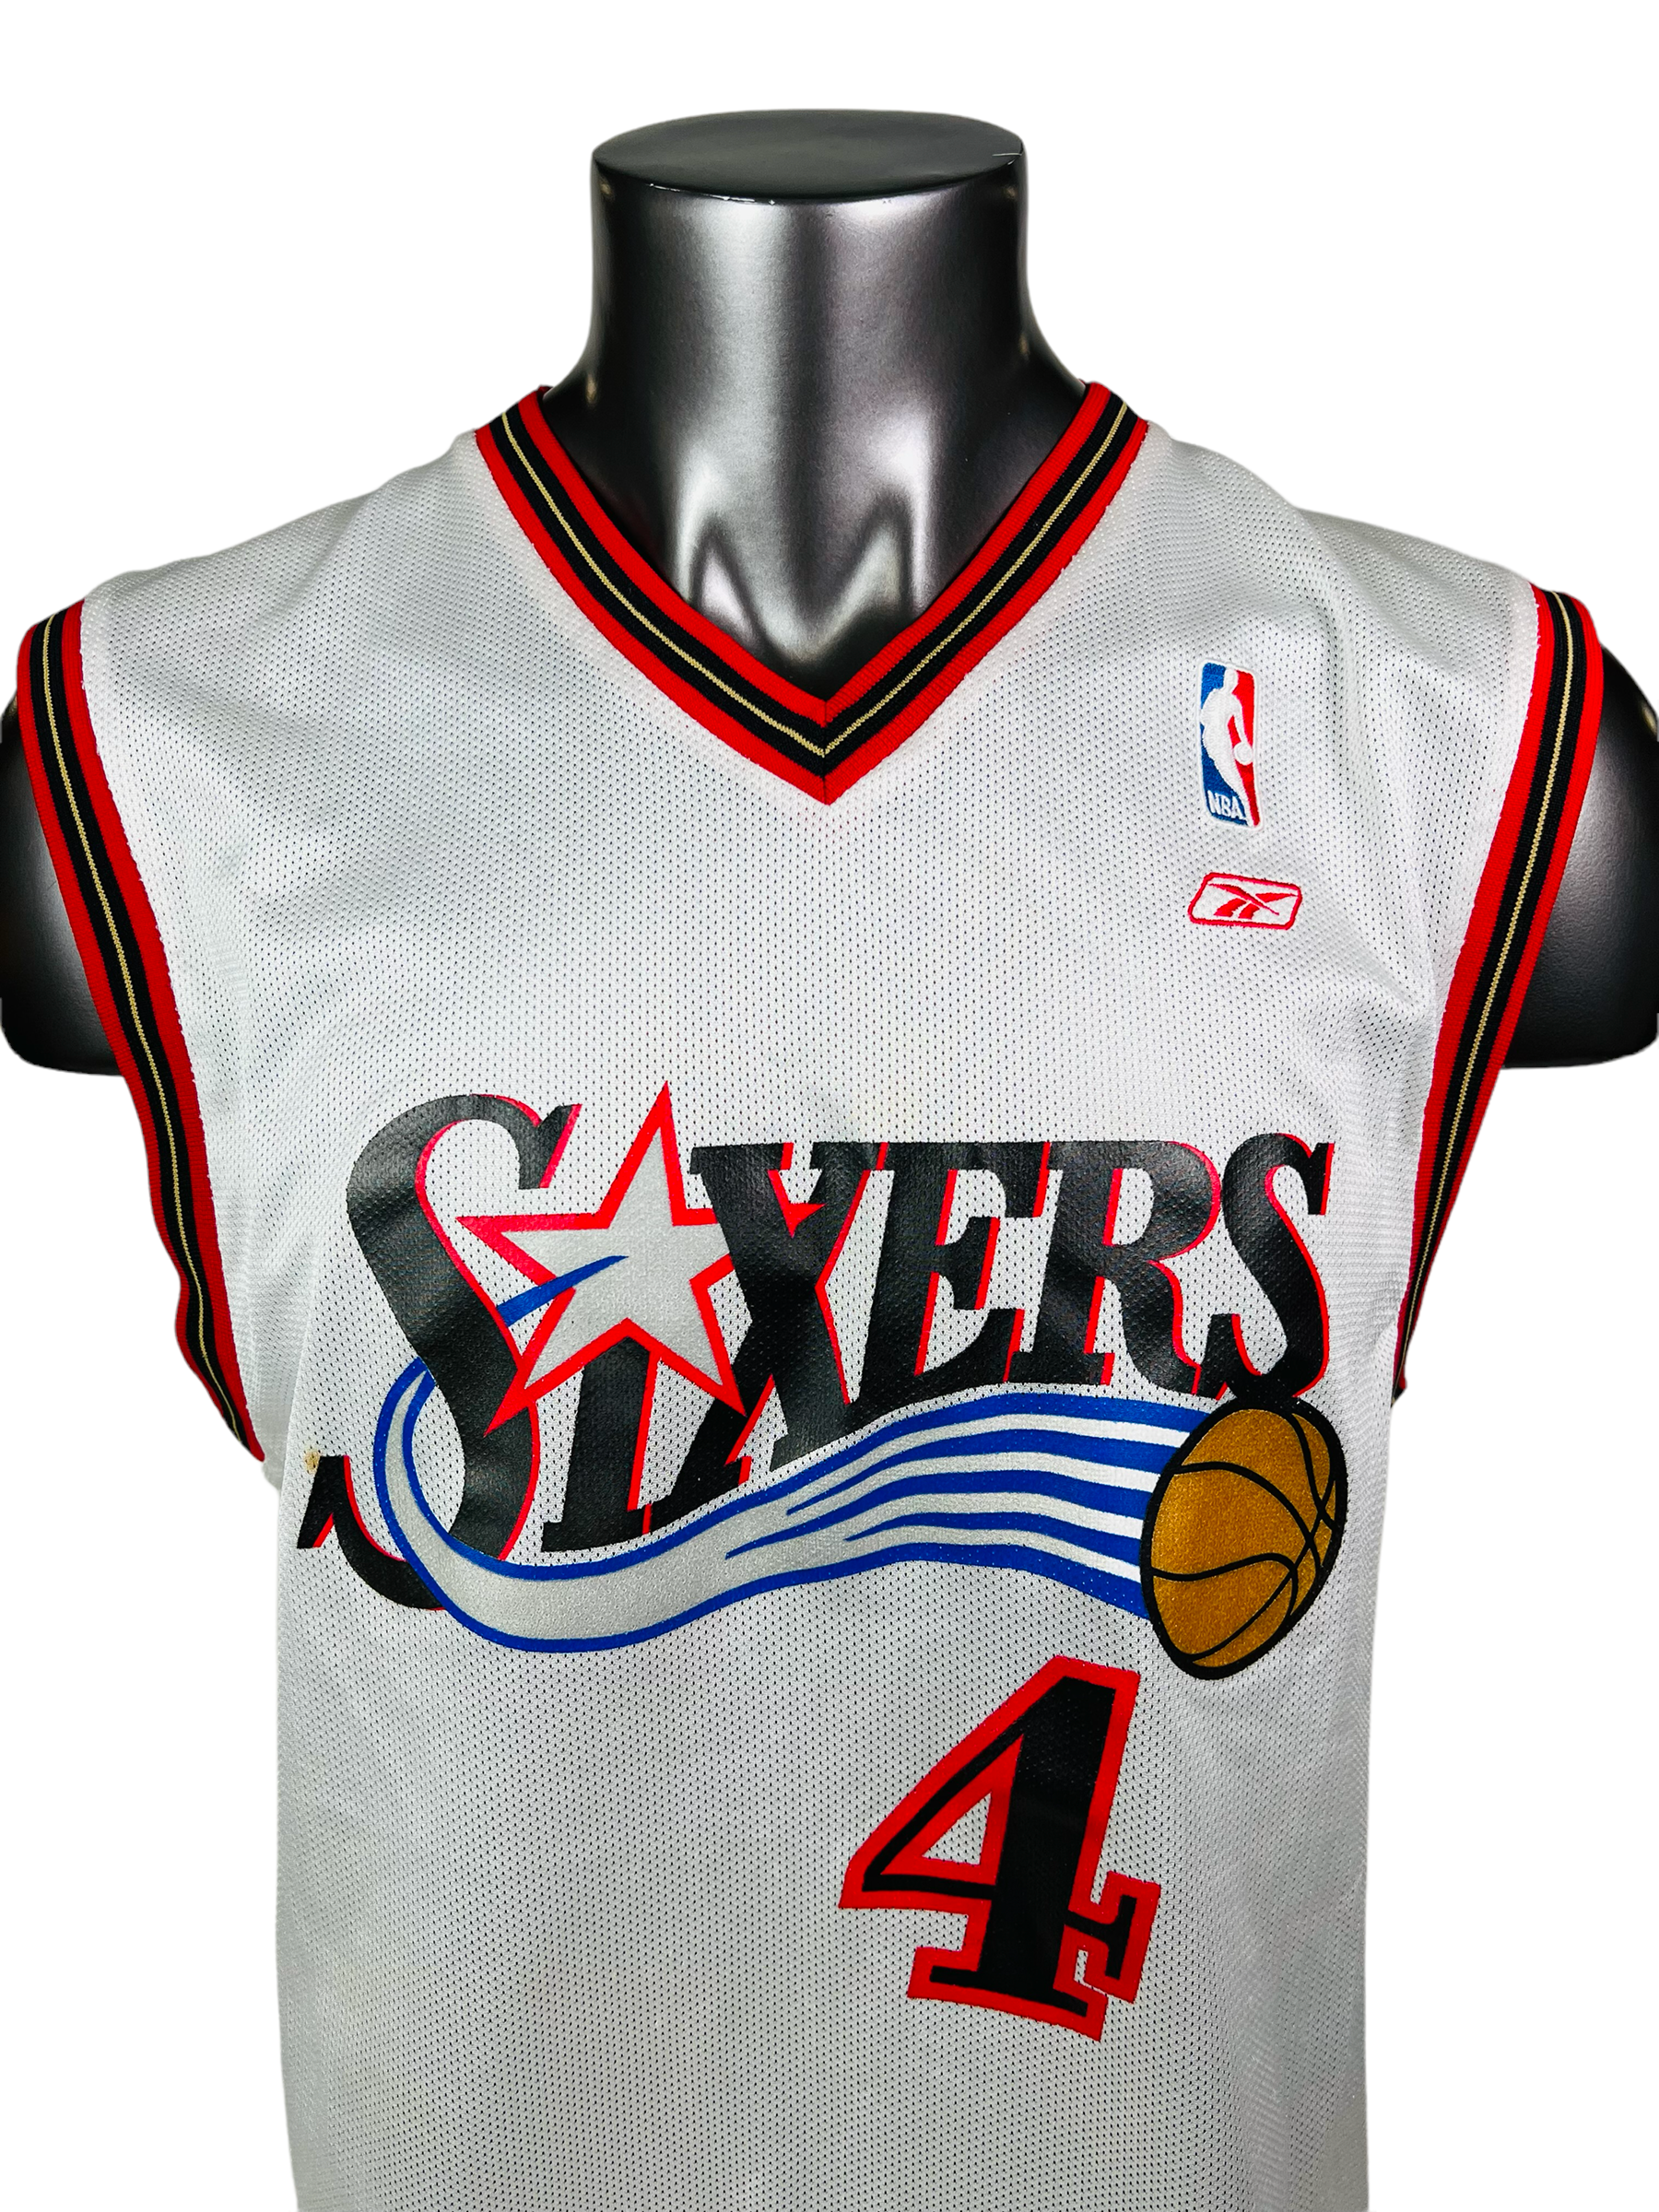 iverson sixers jersey champion